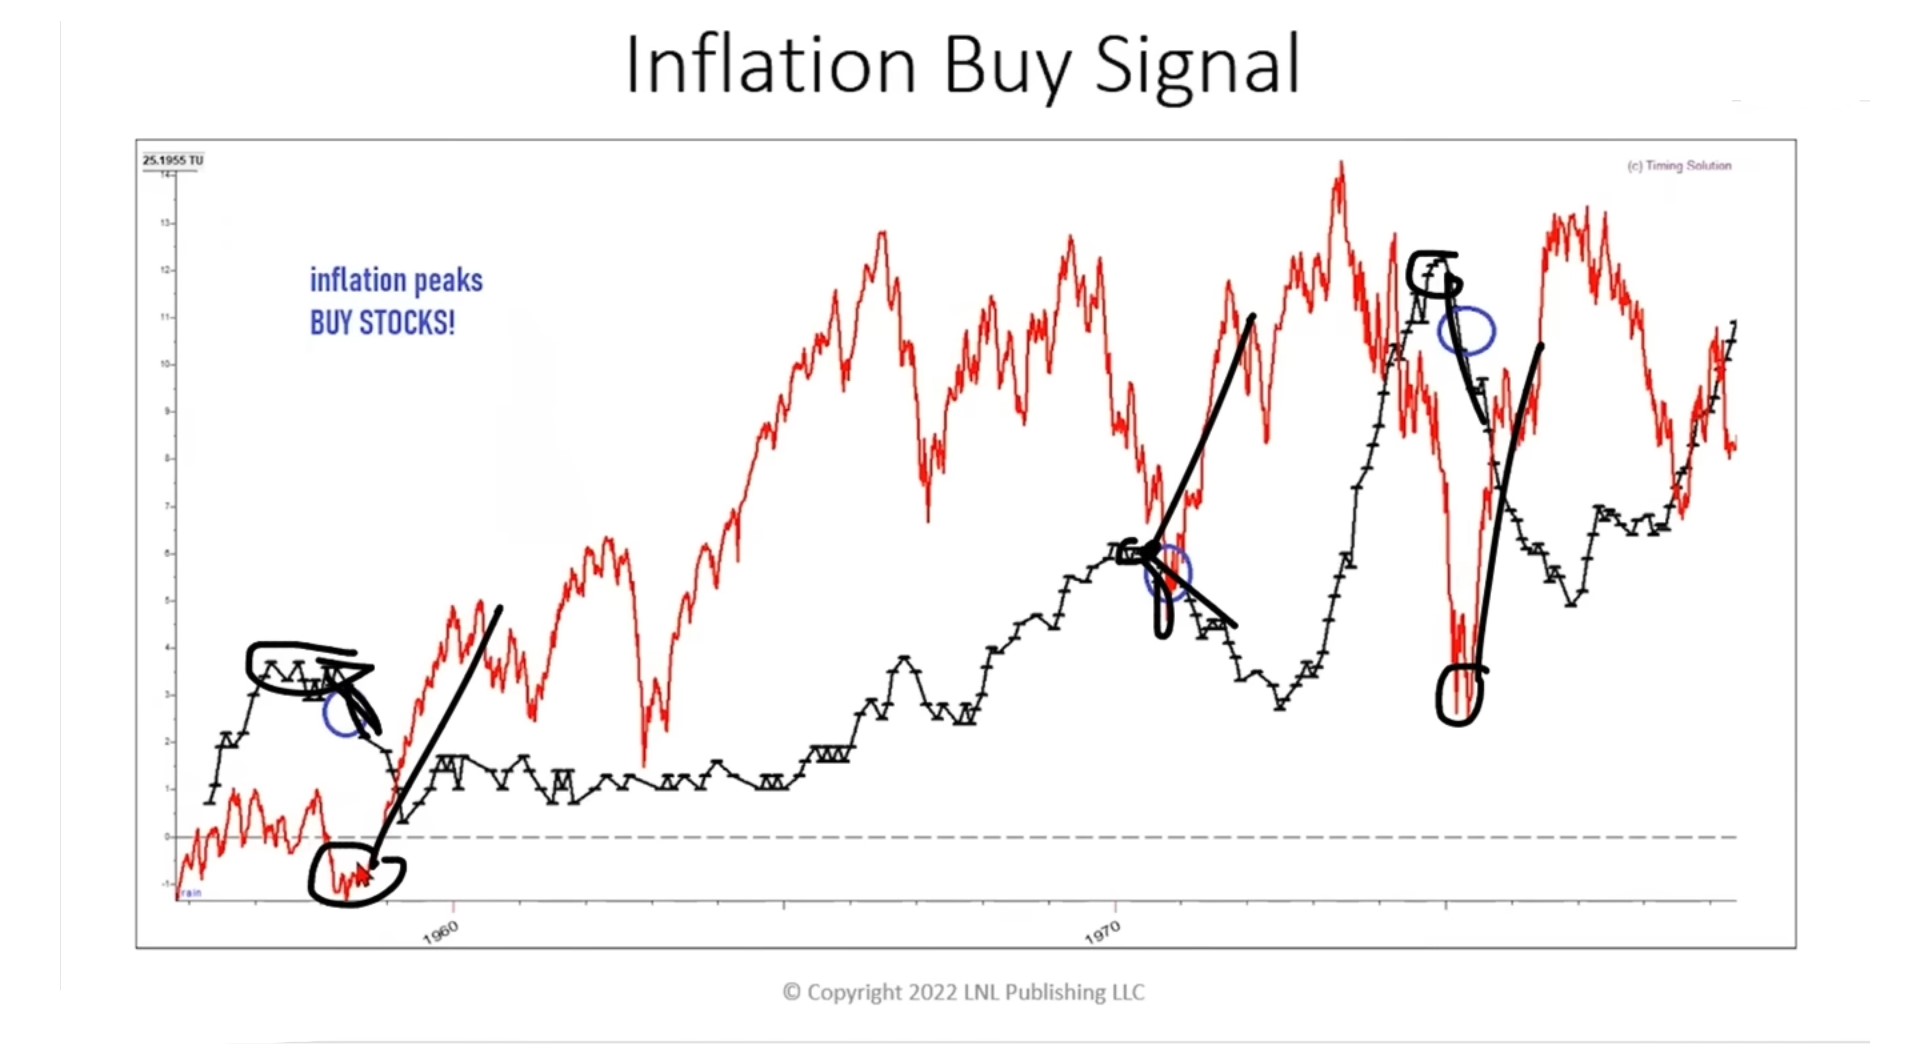 14-26 Inflation Buy Signal